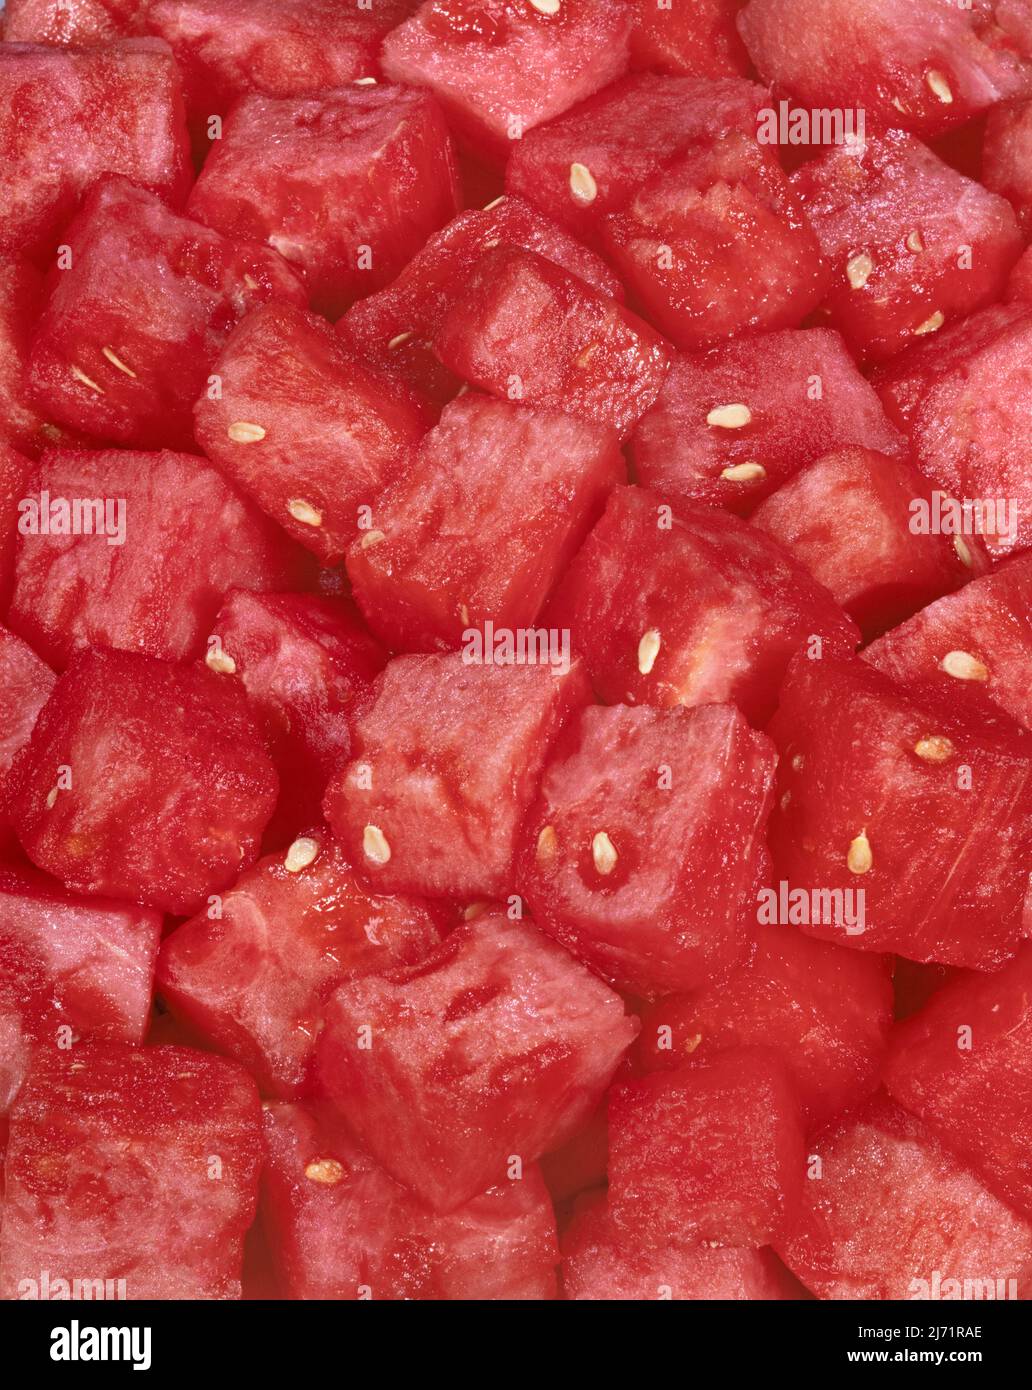 Watermelon cut into juicy chunks. Image from 4x5 inch film transparency. Stock Photo